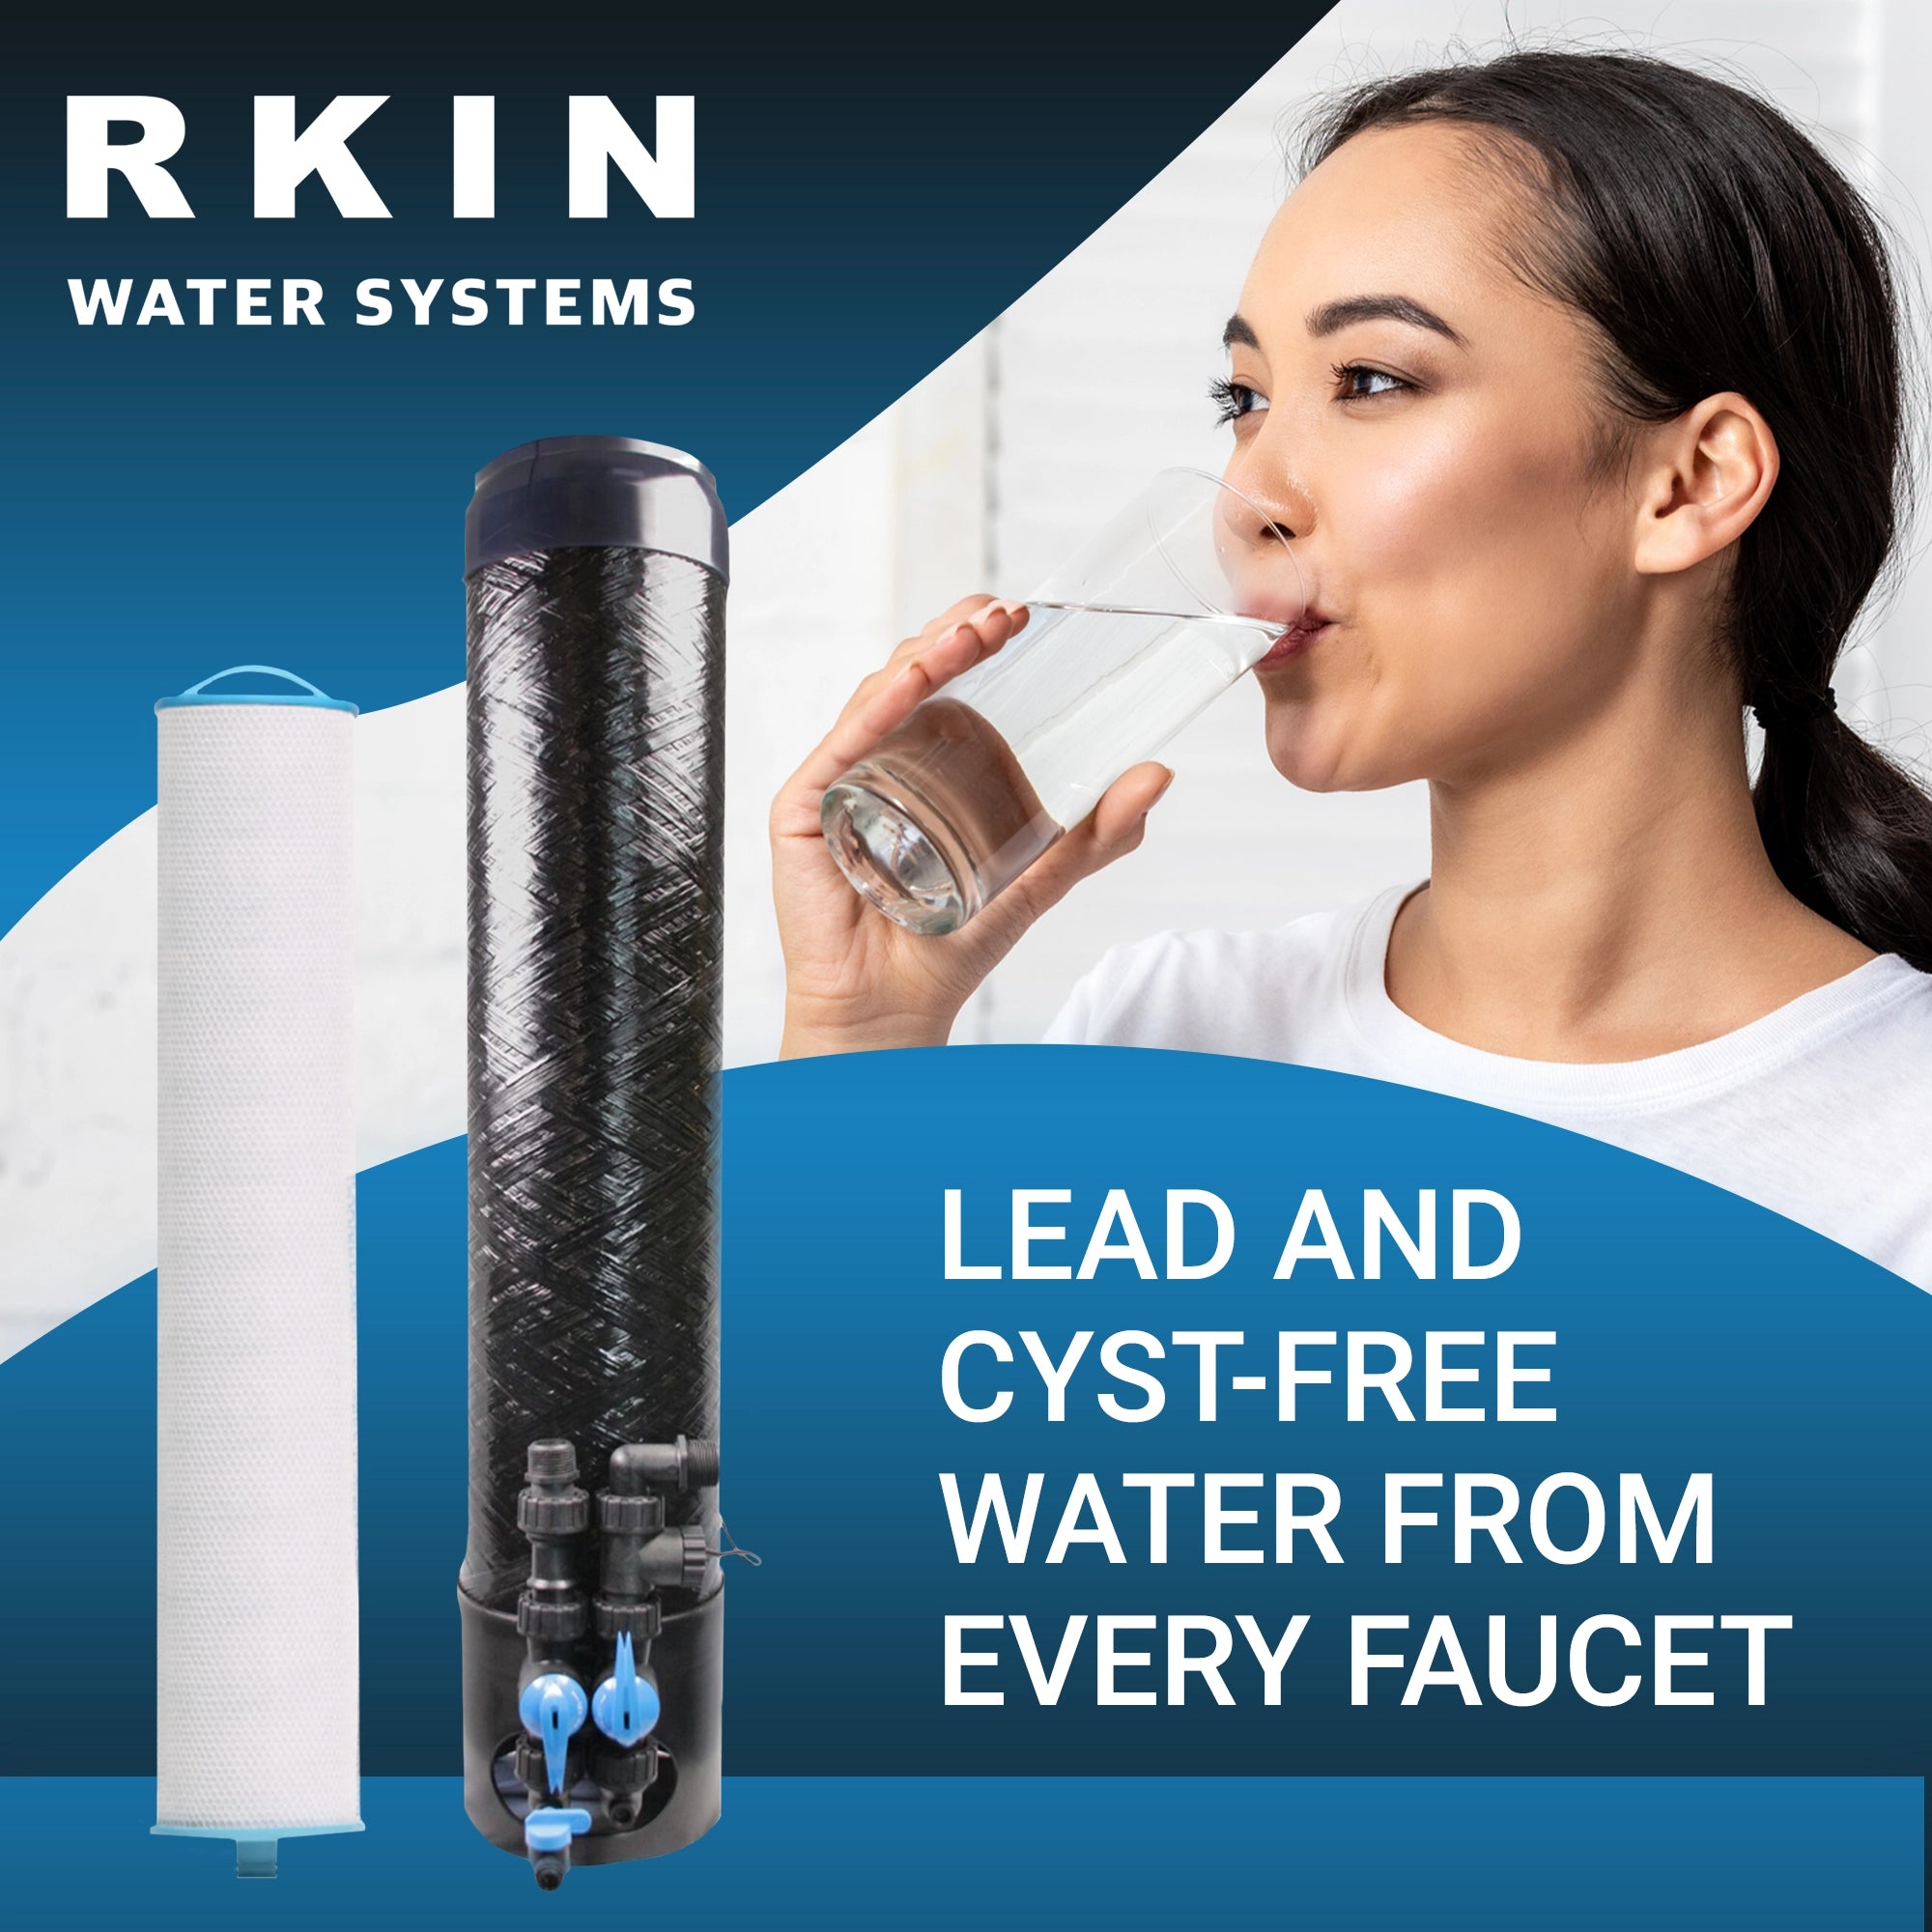 OP1L Certified Whole House Lead, Cyst, PFOA, and PFOS Water Filter System